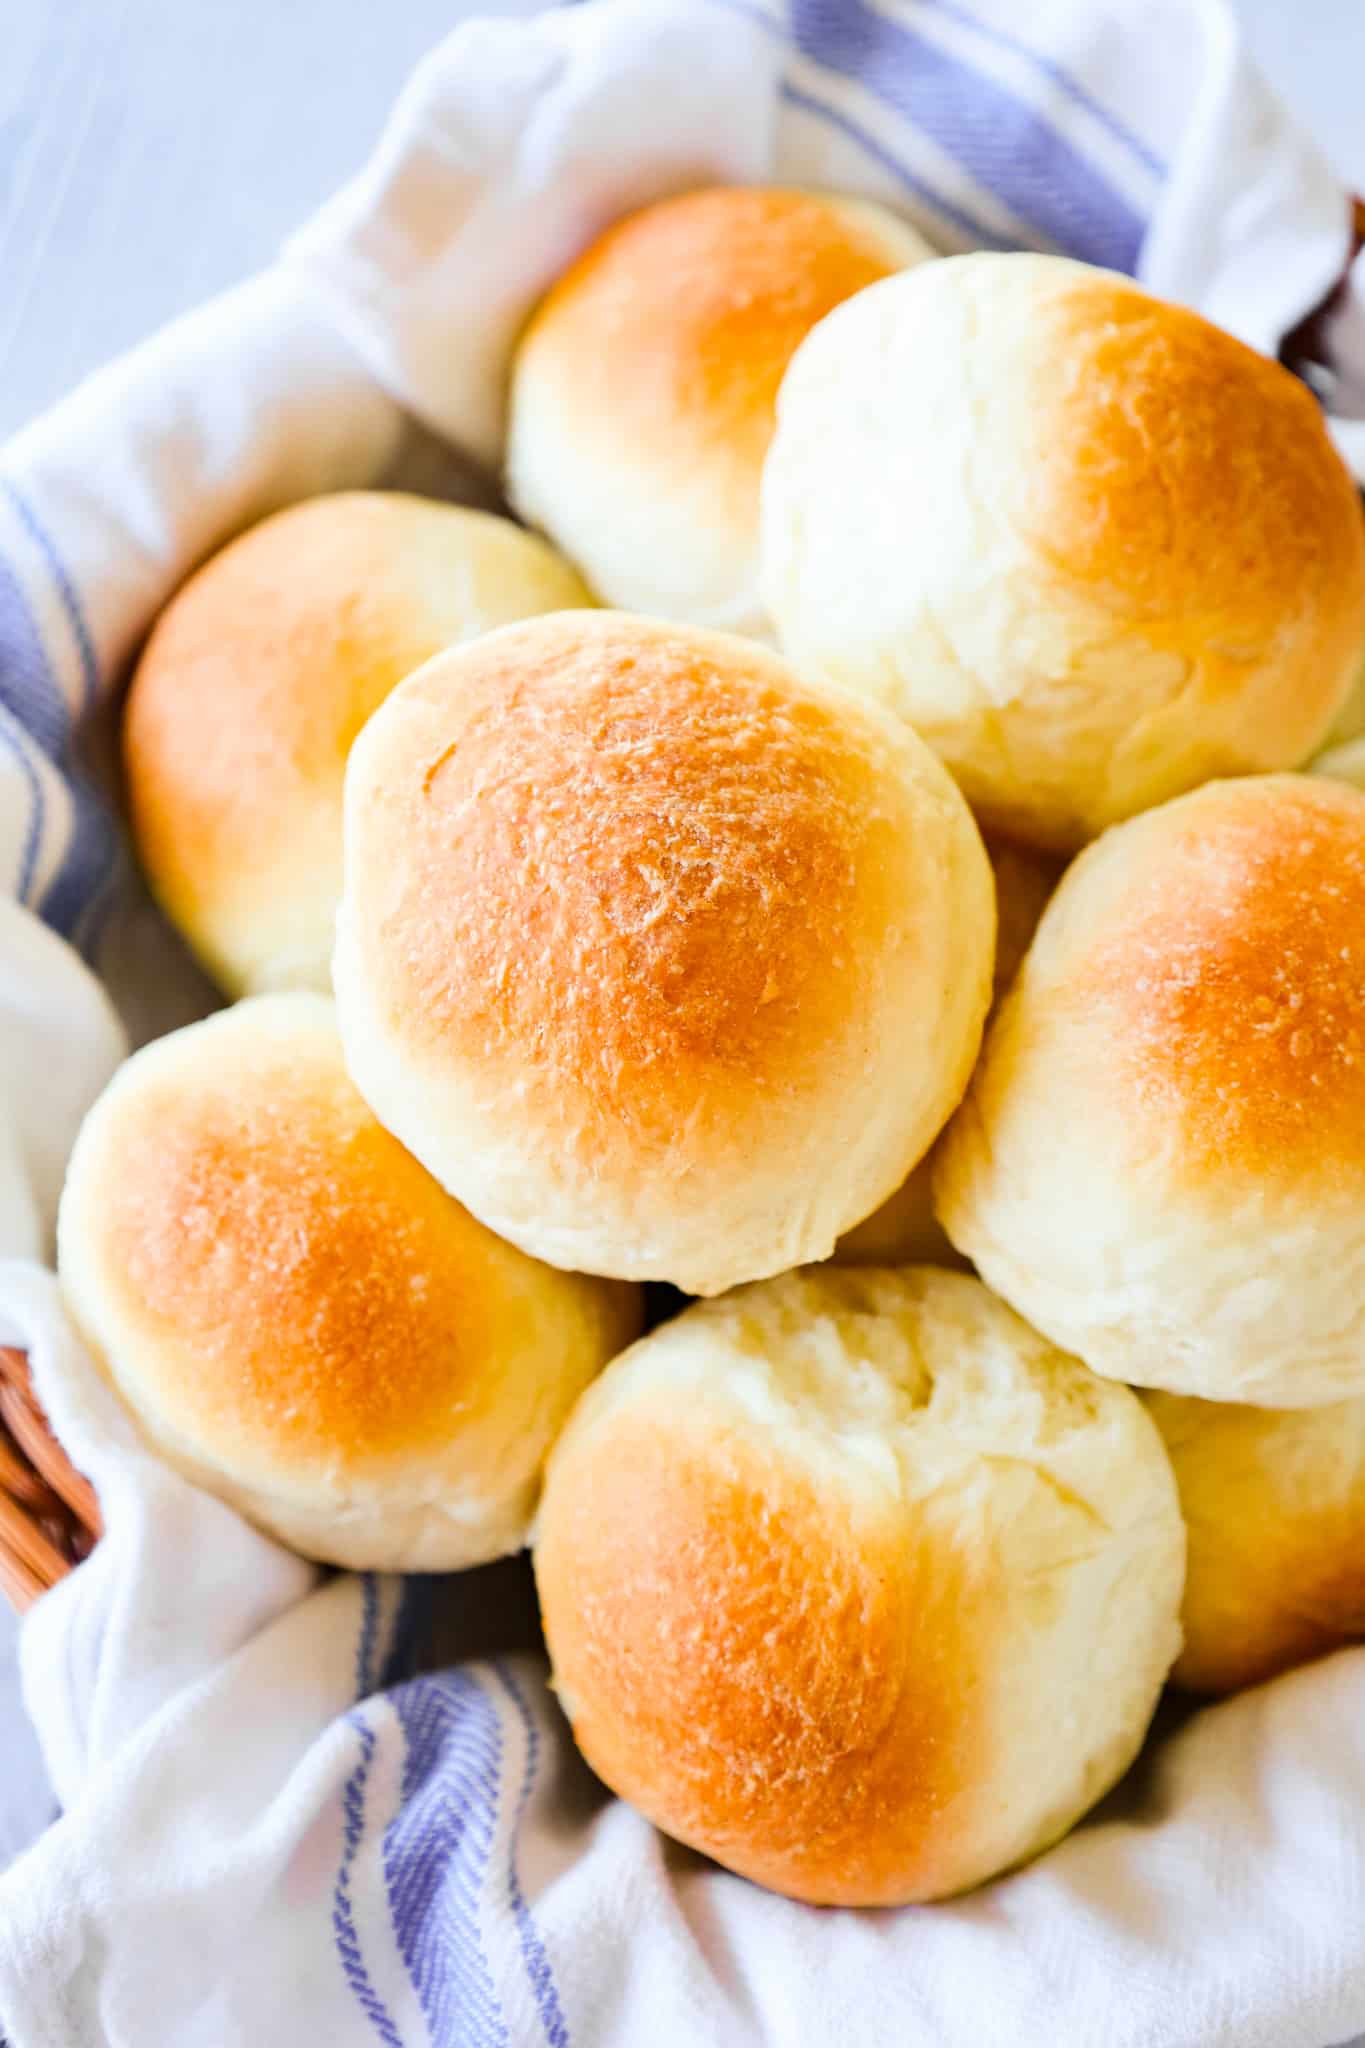 Bread Machine Dinner Rolls are delicious buttery buns perfect for serving with any meal.